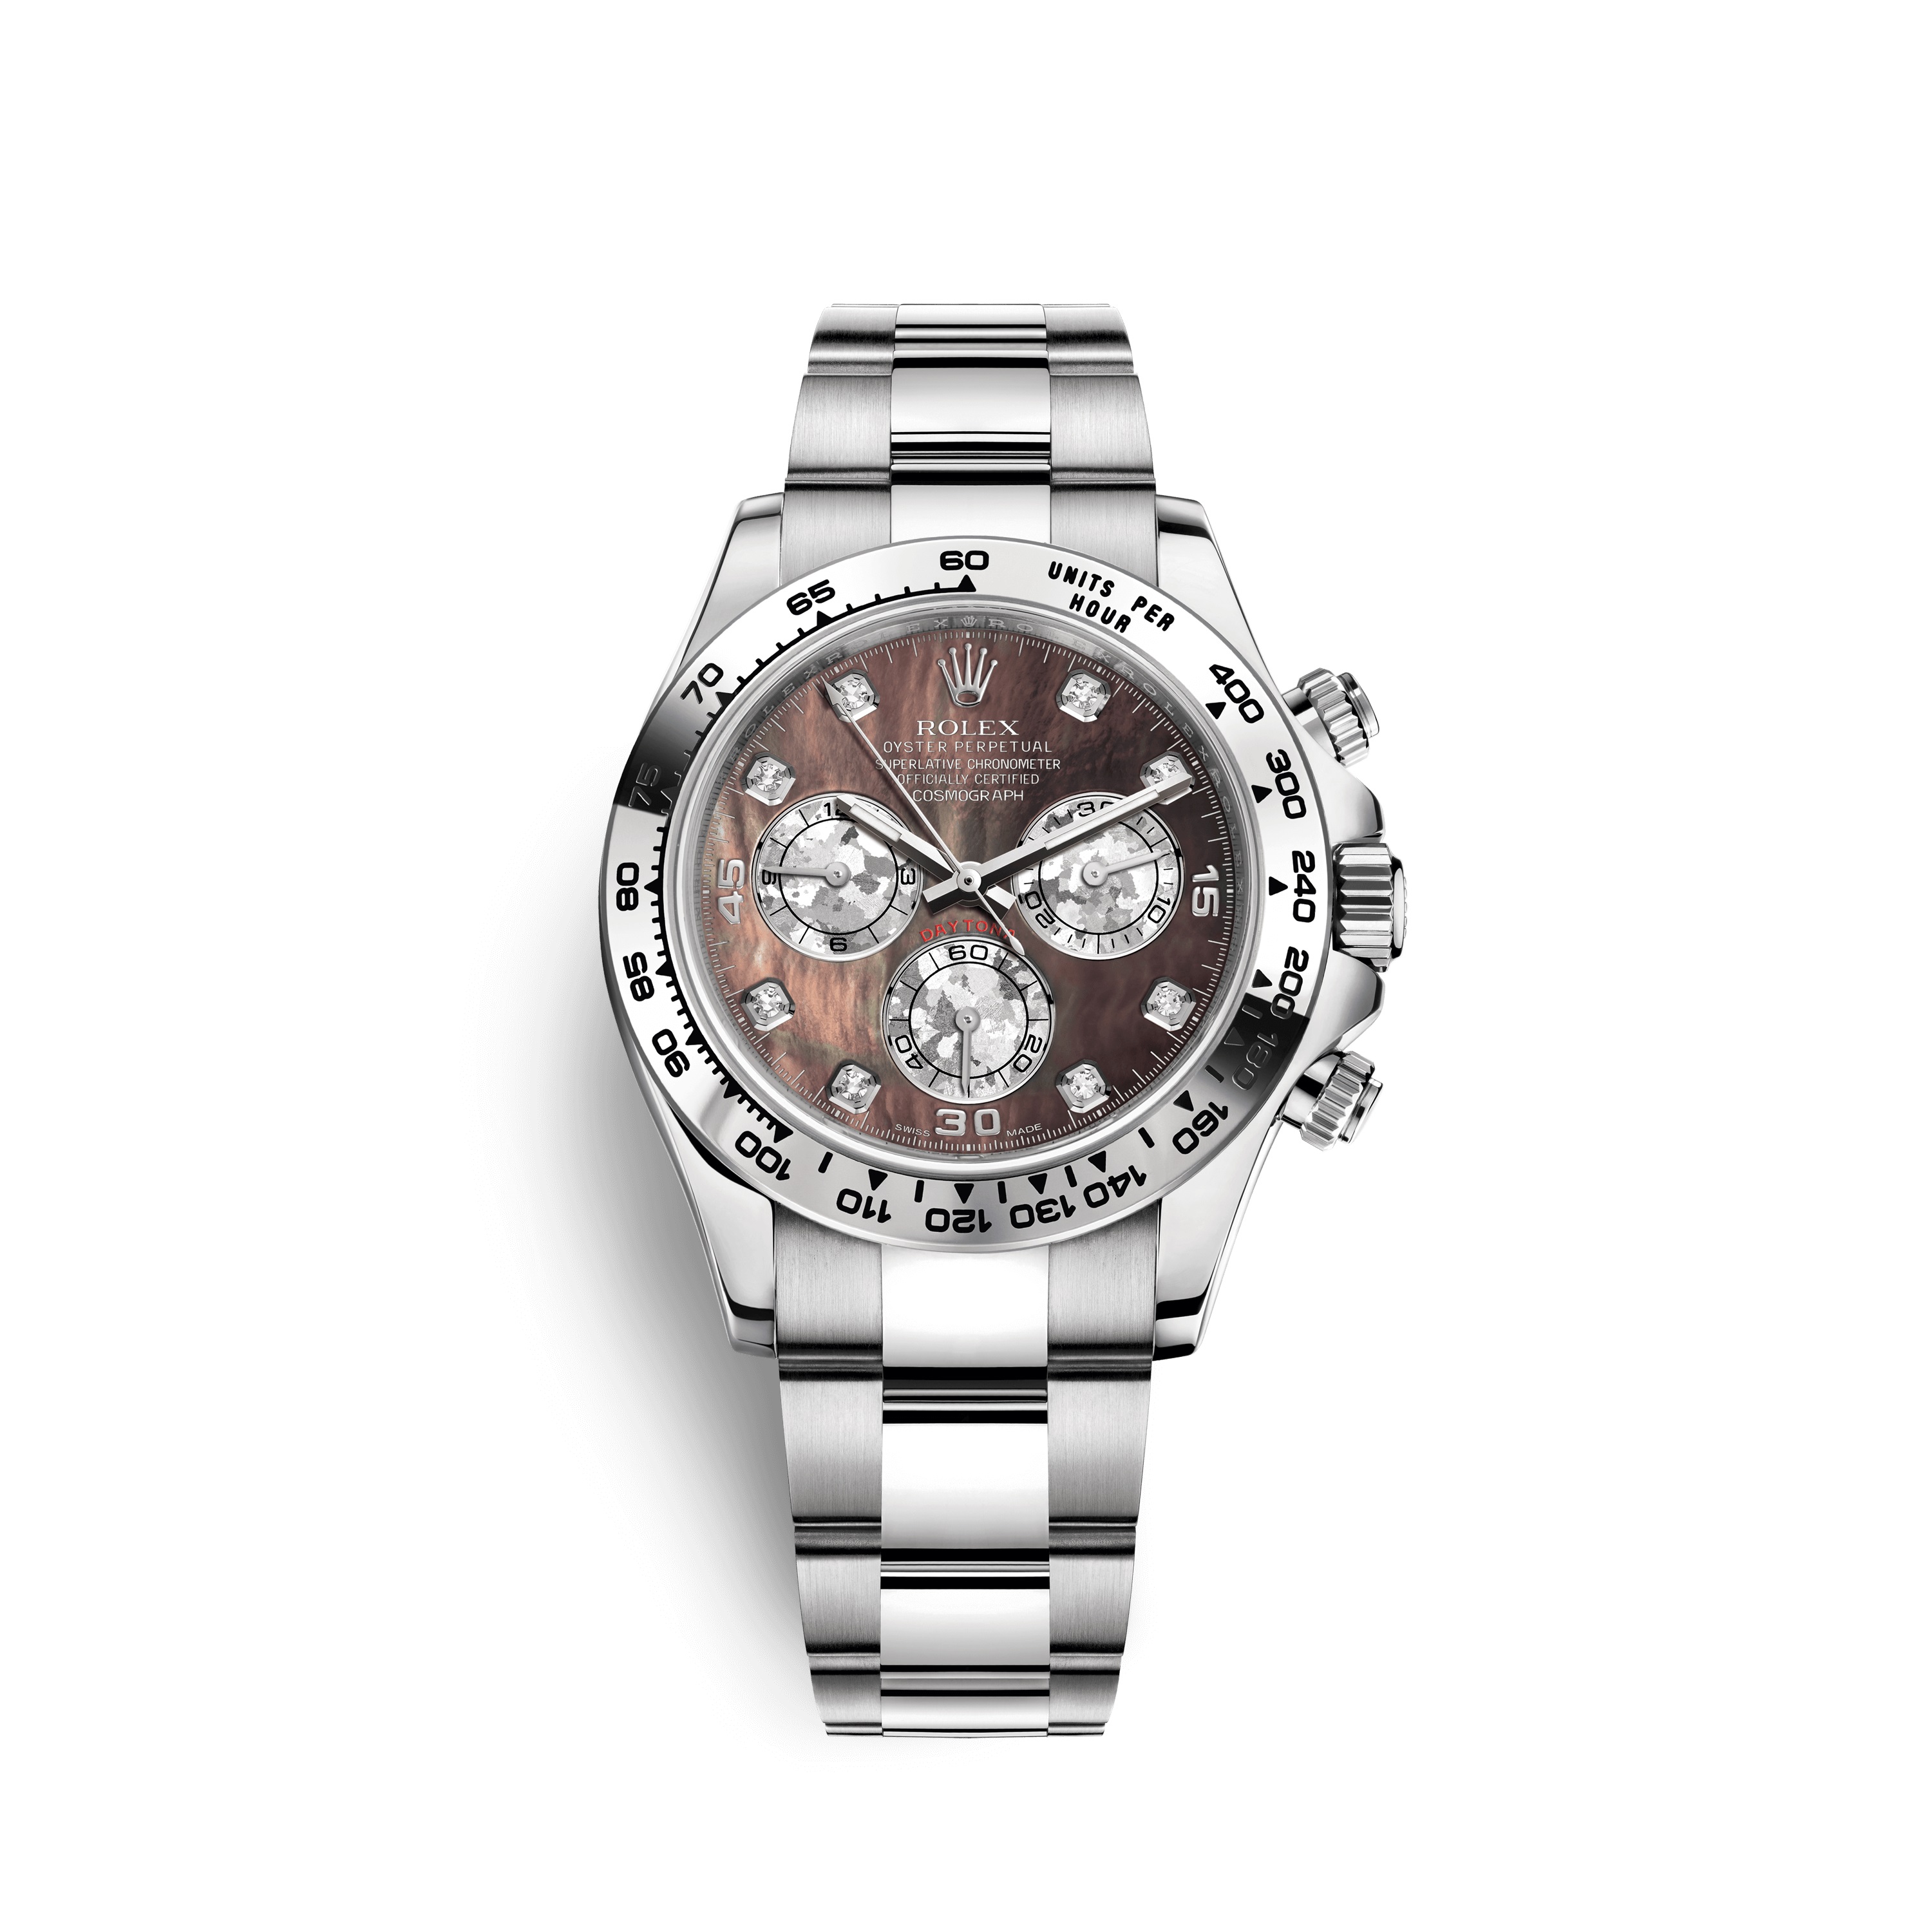 Cosmograph Daytona 116509 White Gold Watch (Black Mother-of-Pearl Set with Diamonds)